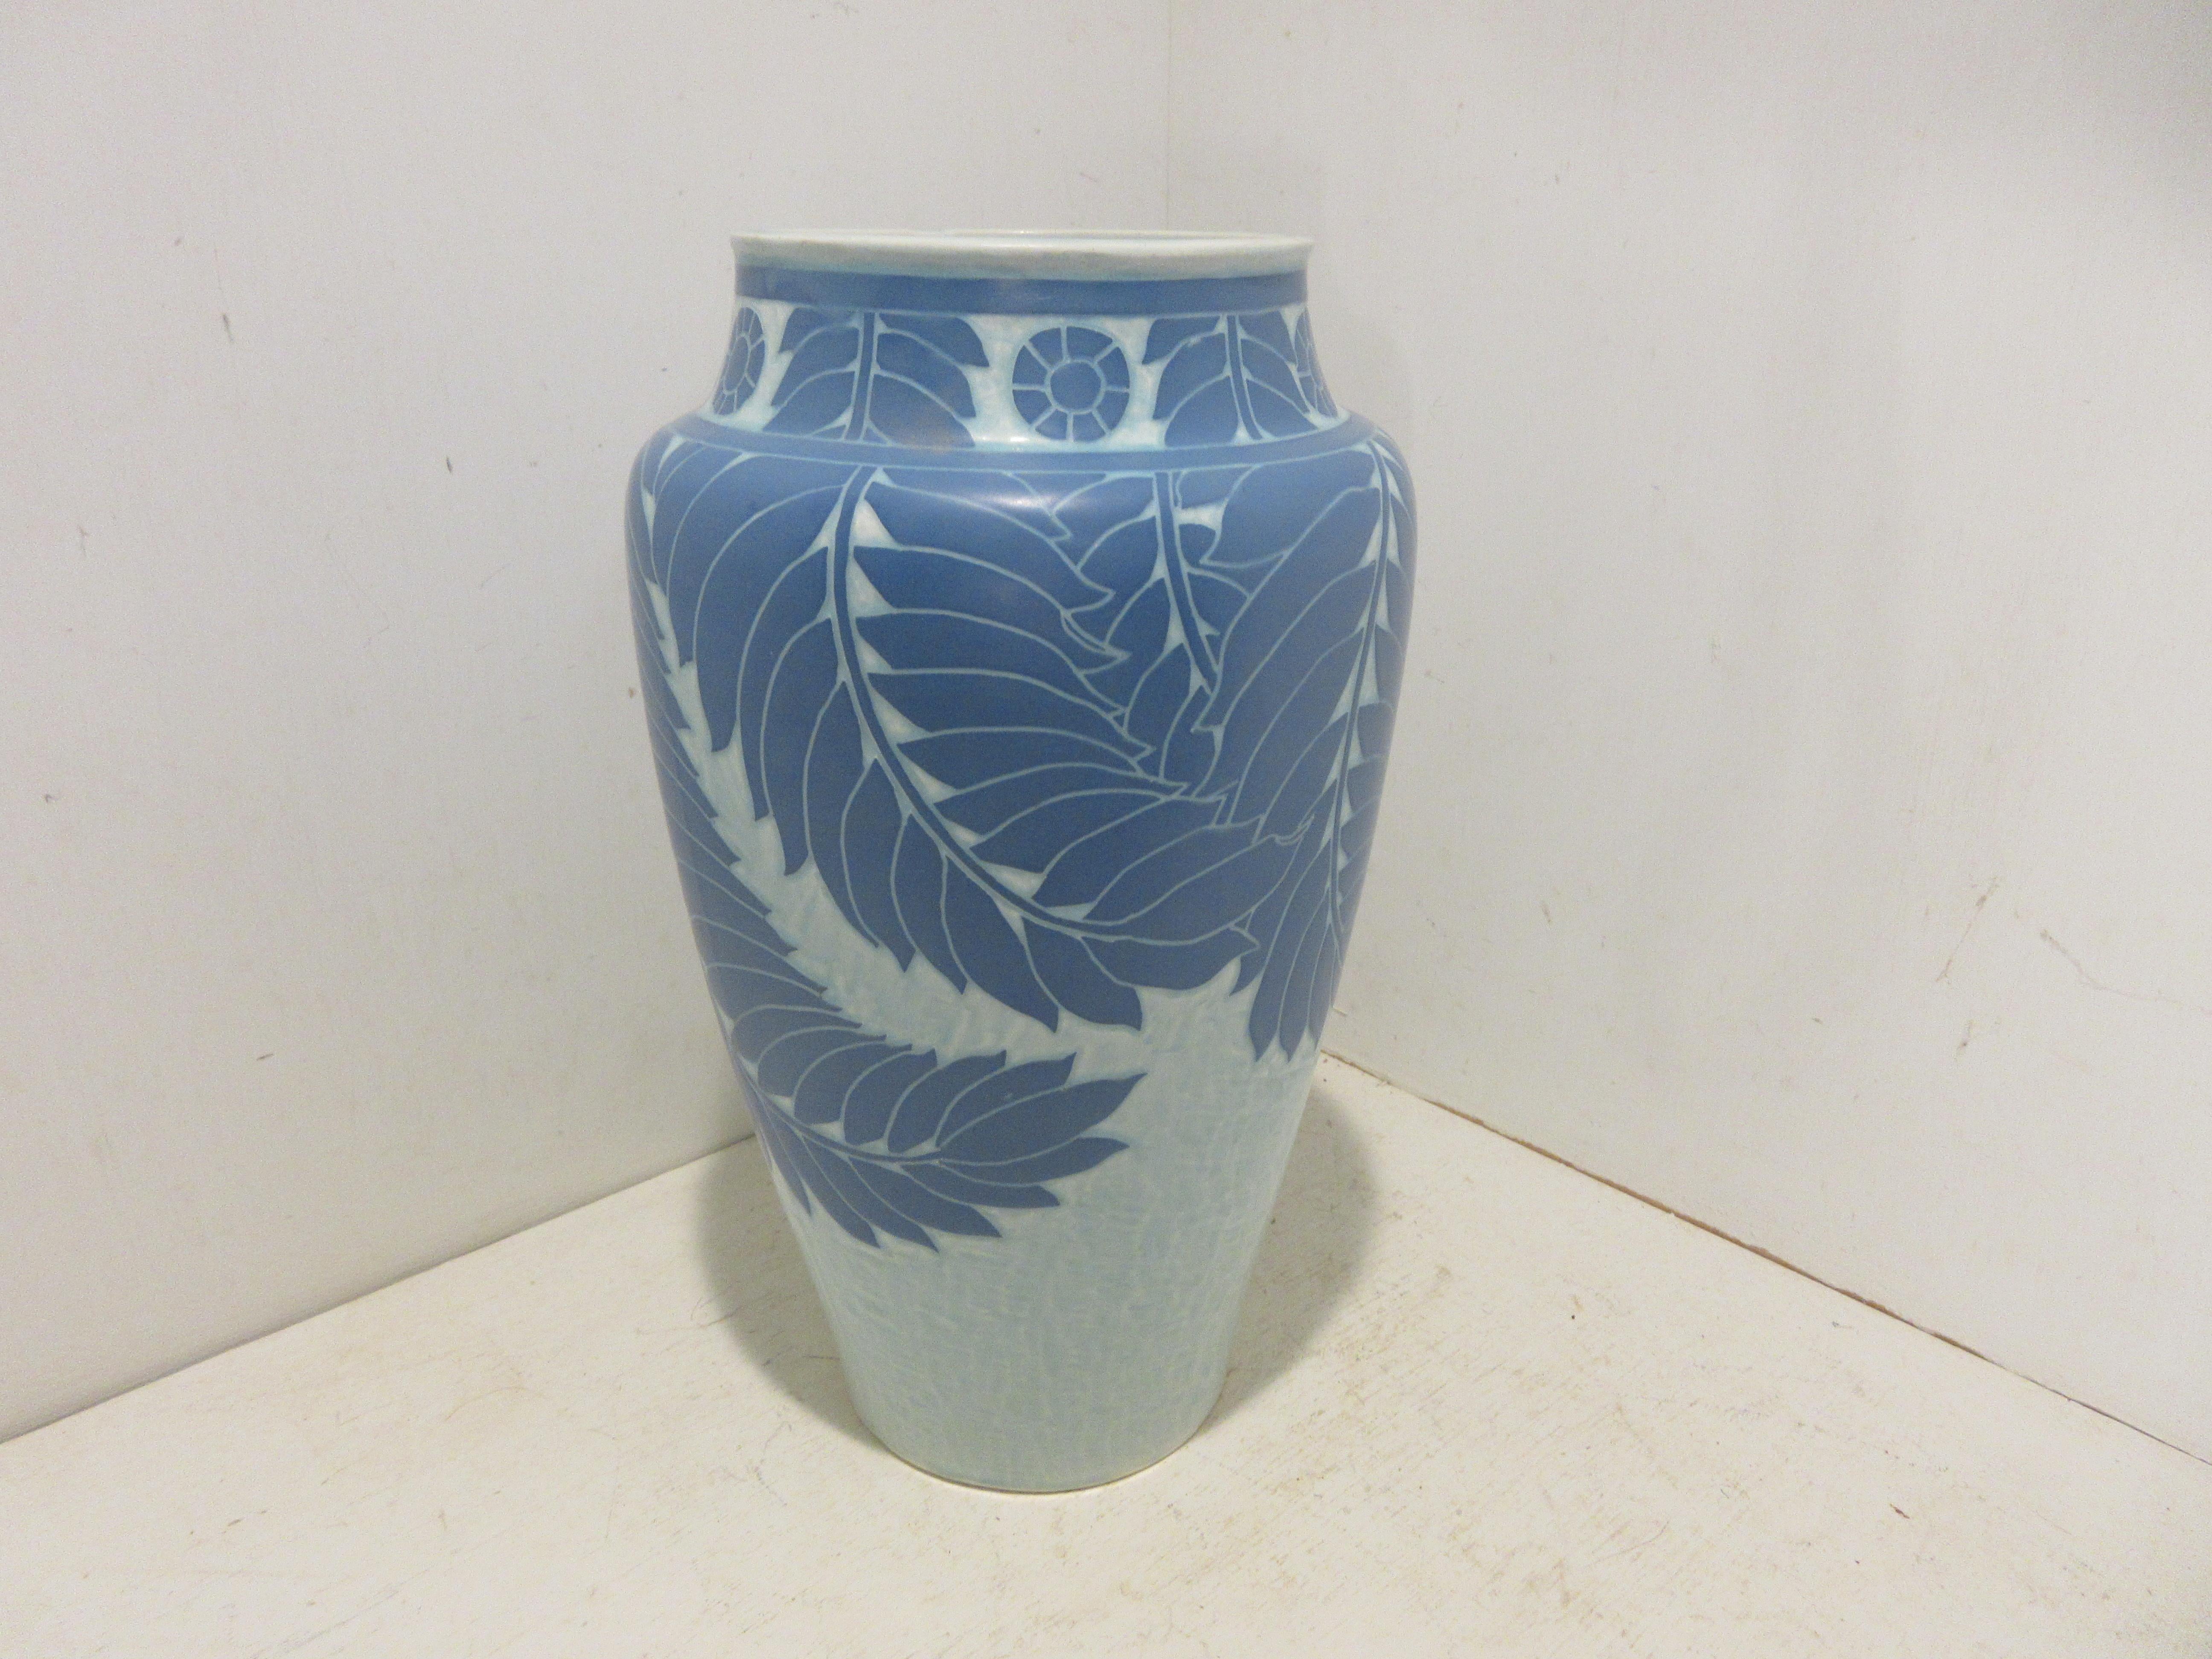 This is a handmade, 1 off Sgraffito vase made by the Swedish ceramic artist Josef Ekberg in 1907. he was one of Sweden's top ceramic artist at the time. He started working at the Gustavsberg foundry in 1898 till his death in 1945. His works are